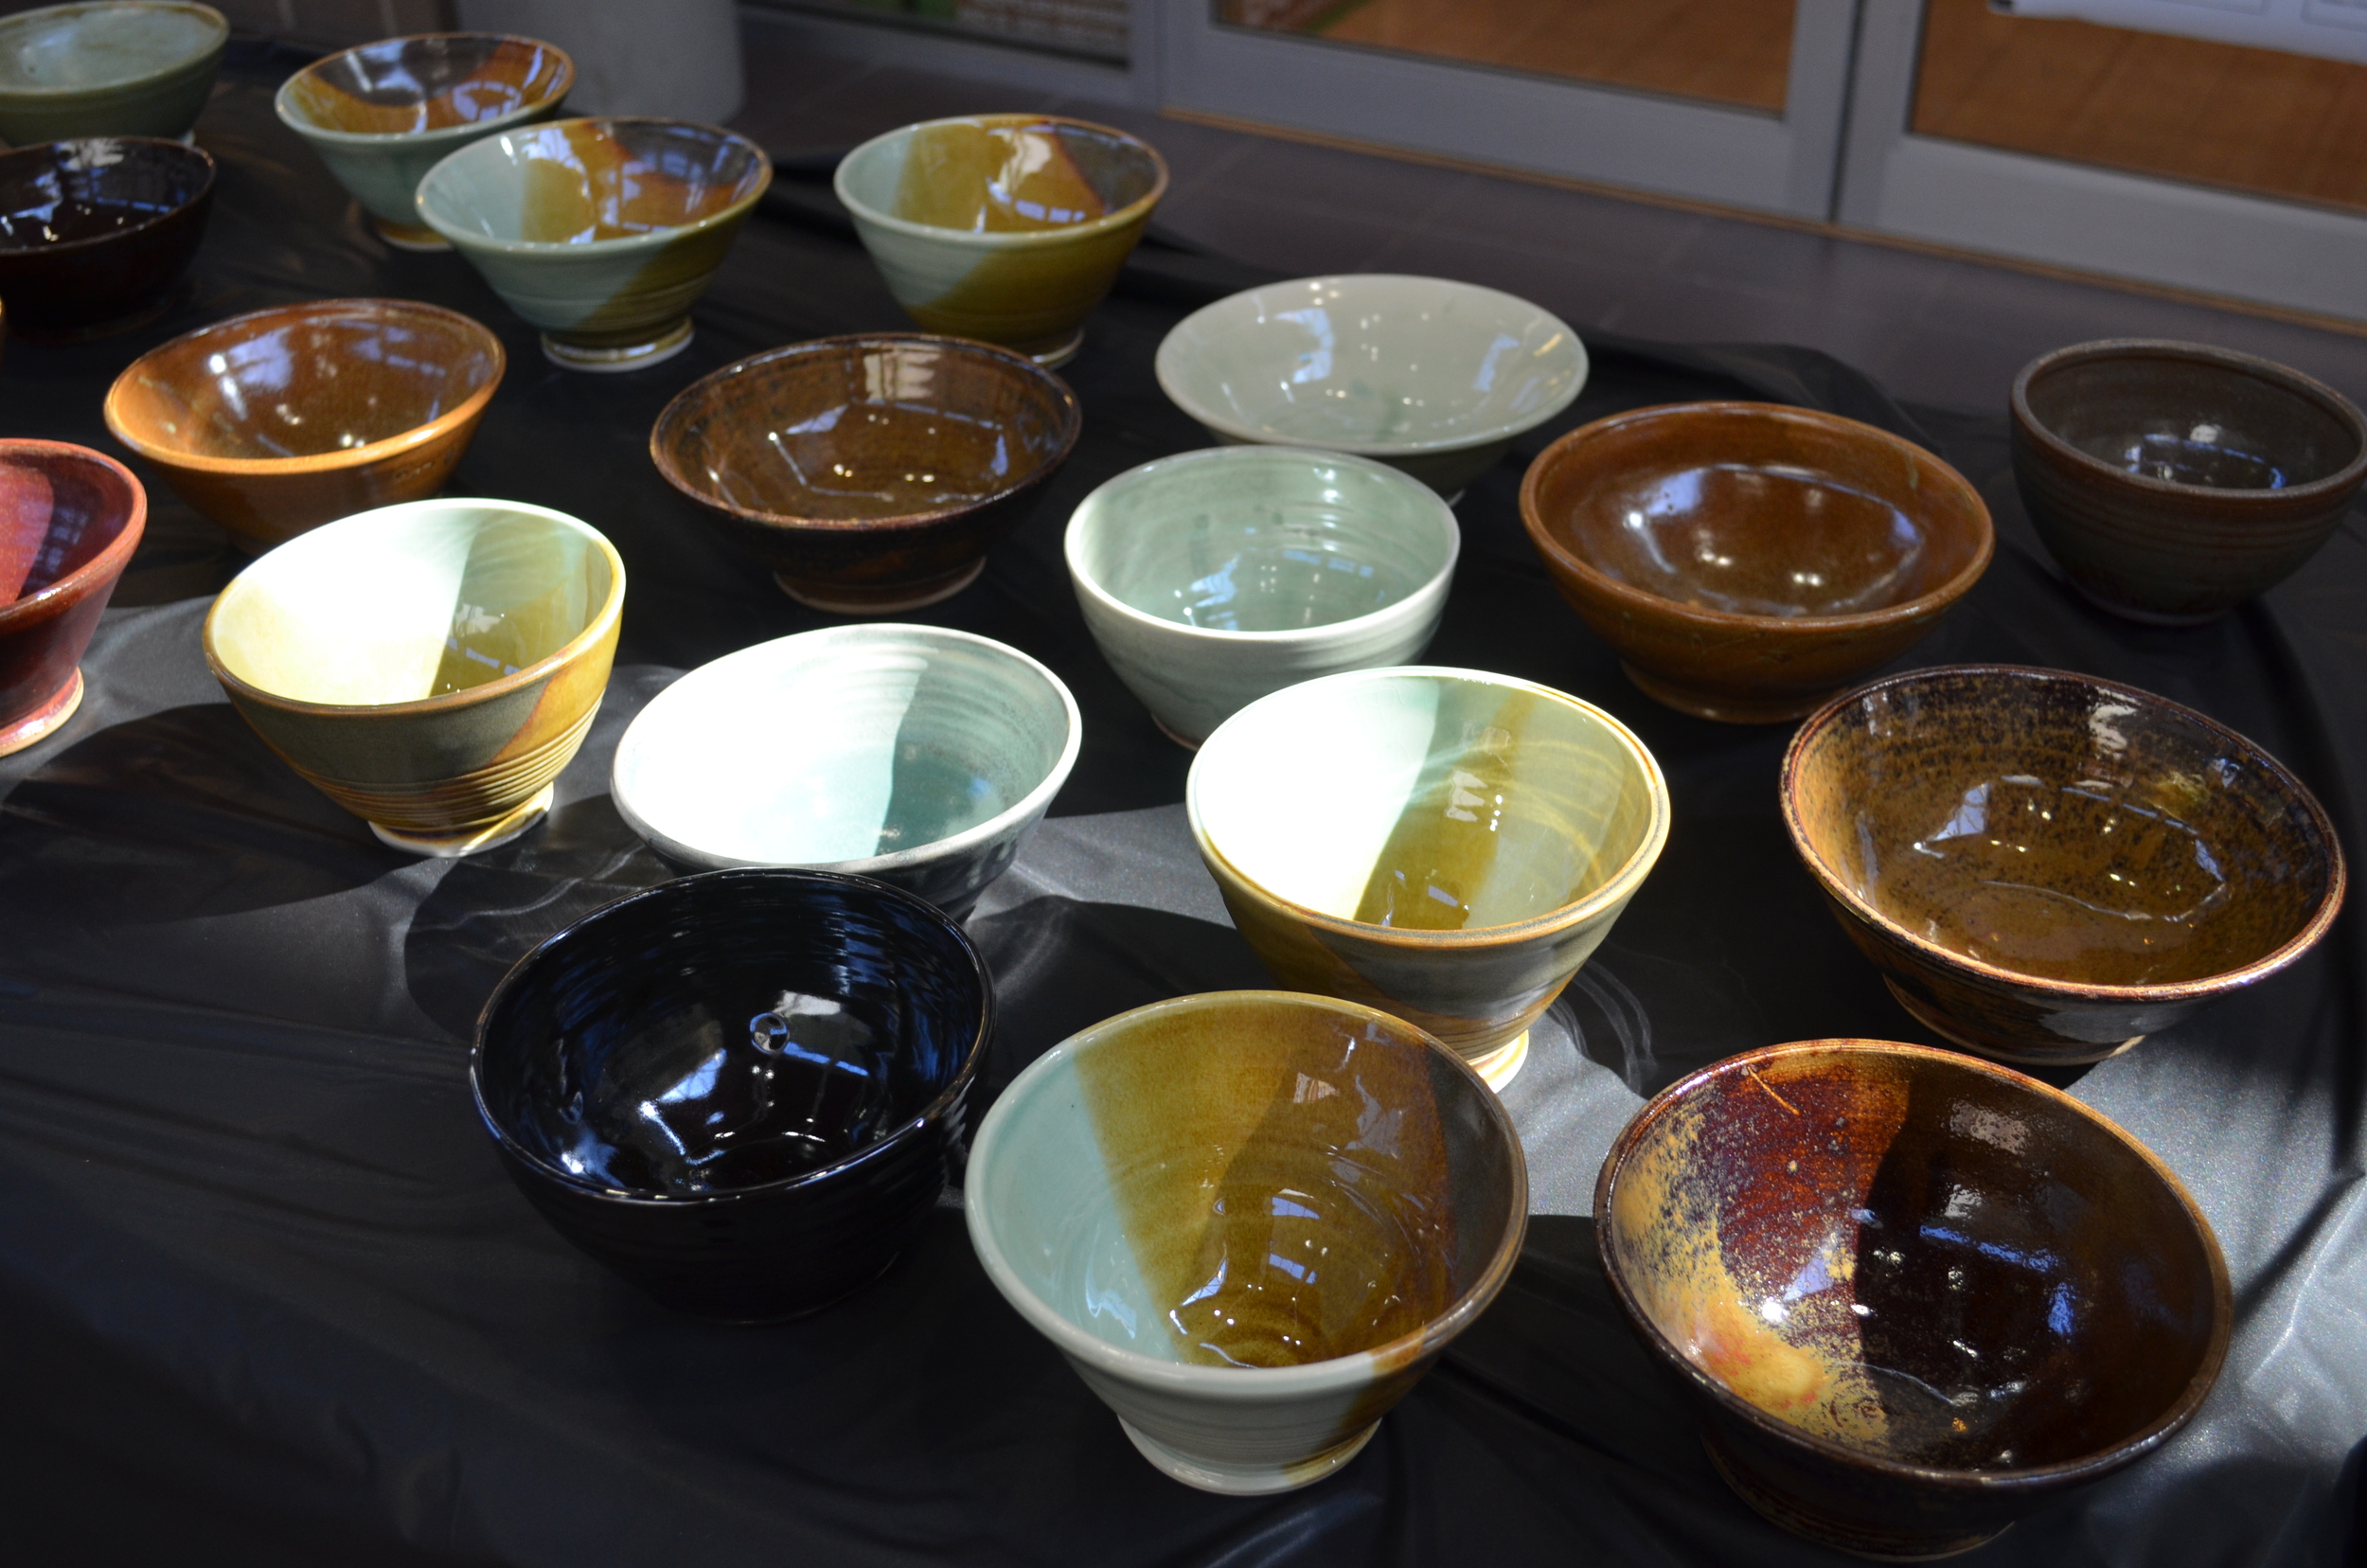 Each bowl is a unique reminder of the needs of the community.